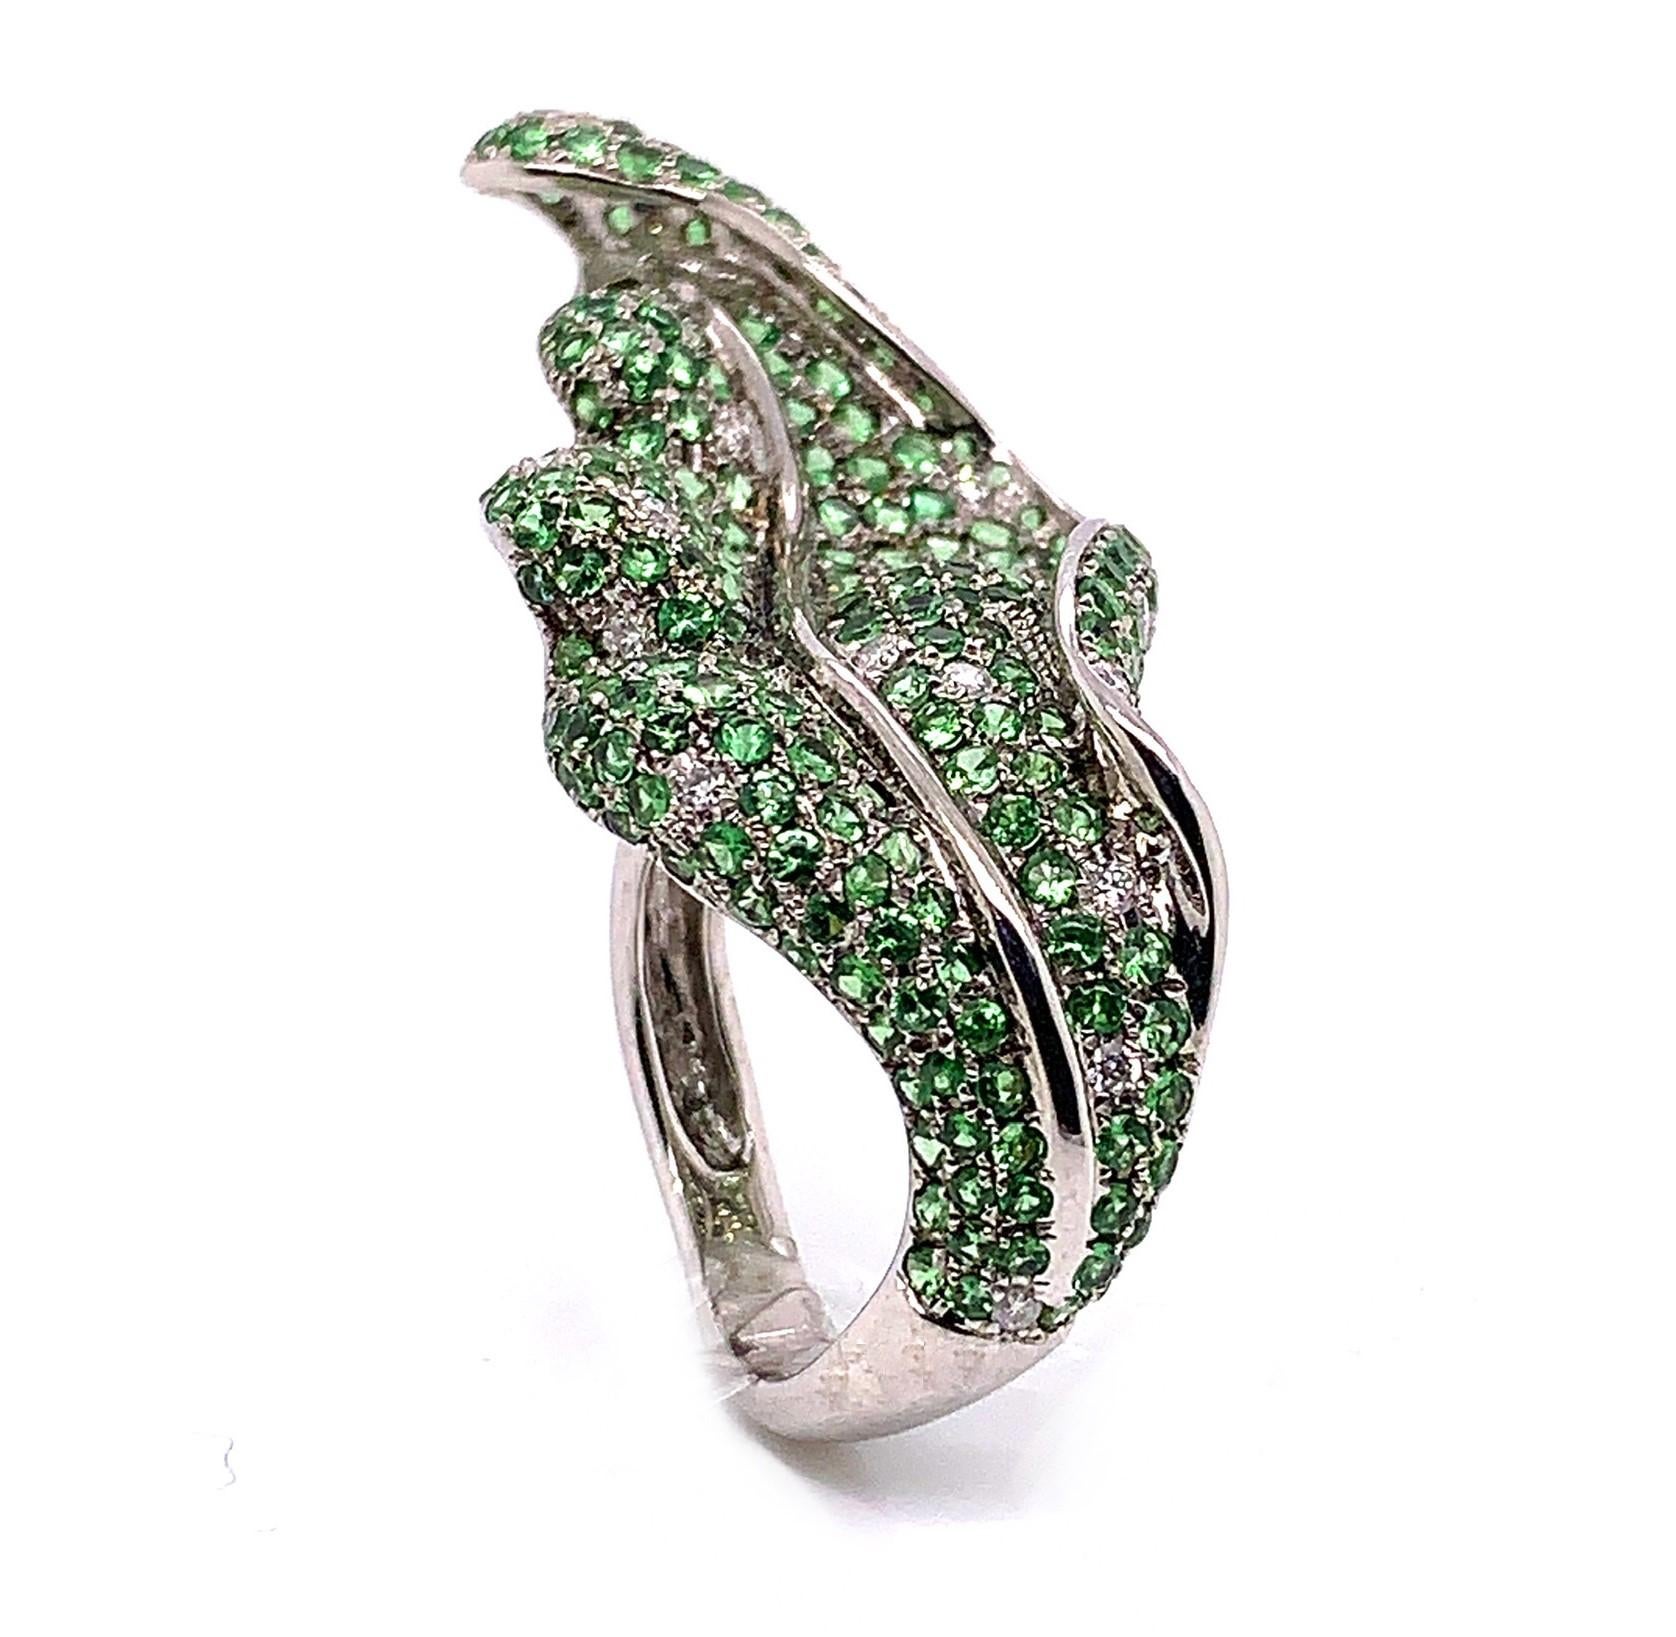 3.99 Carat Green Tsavorite and White Diamonds Leaf Ring made by Shimon's Creations is set with round brilliant cut diamonds in a pave setting on the leaf, featuring 3.75 carats of tsavorites and 0.24 carats of withe diamonds stones.
The leaves are